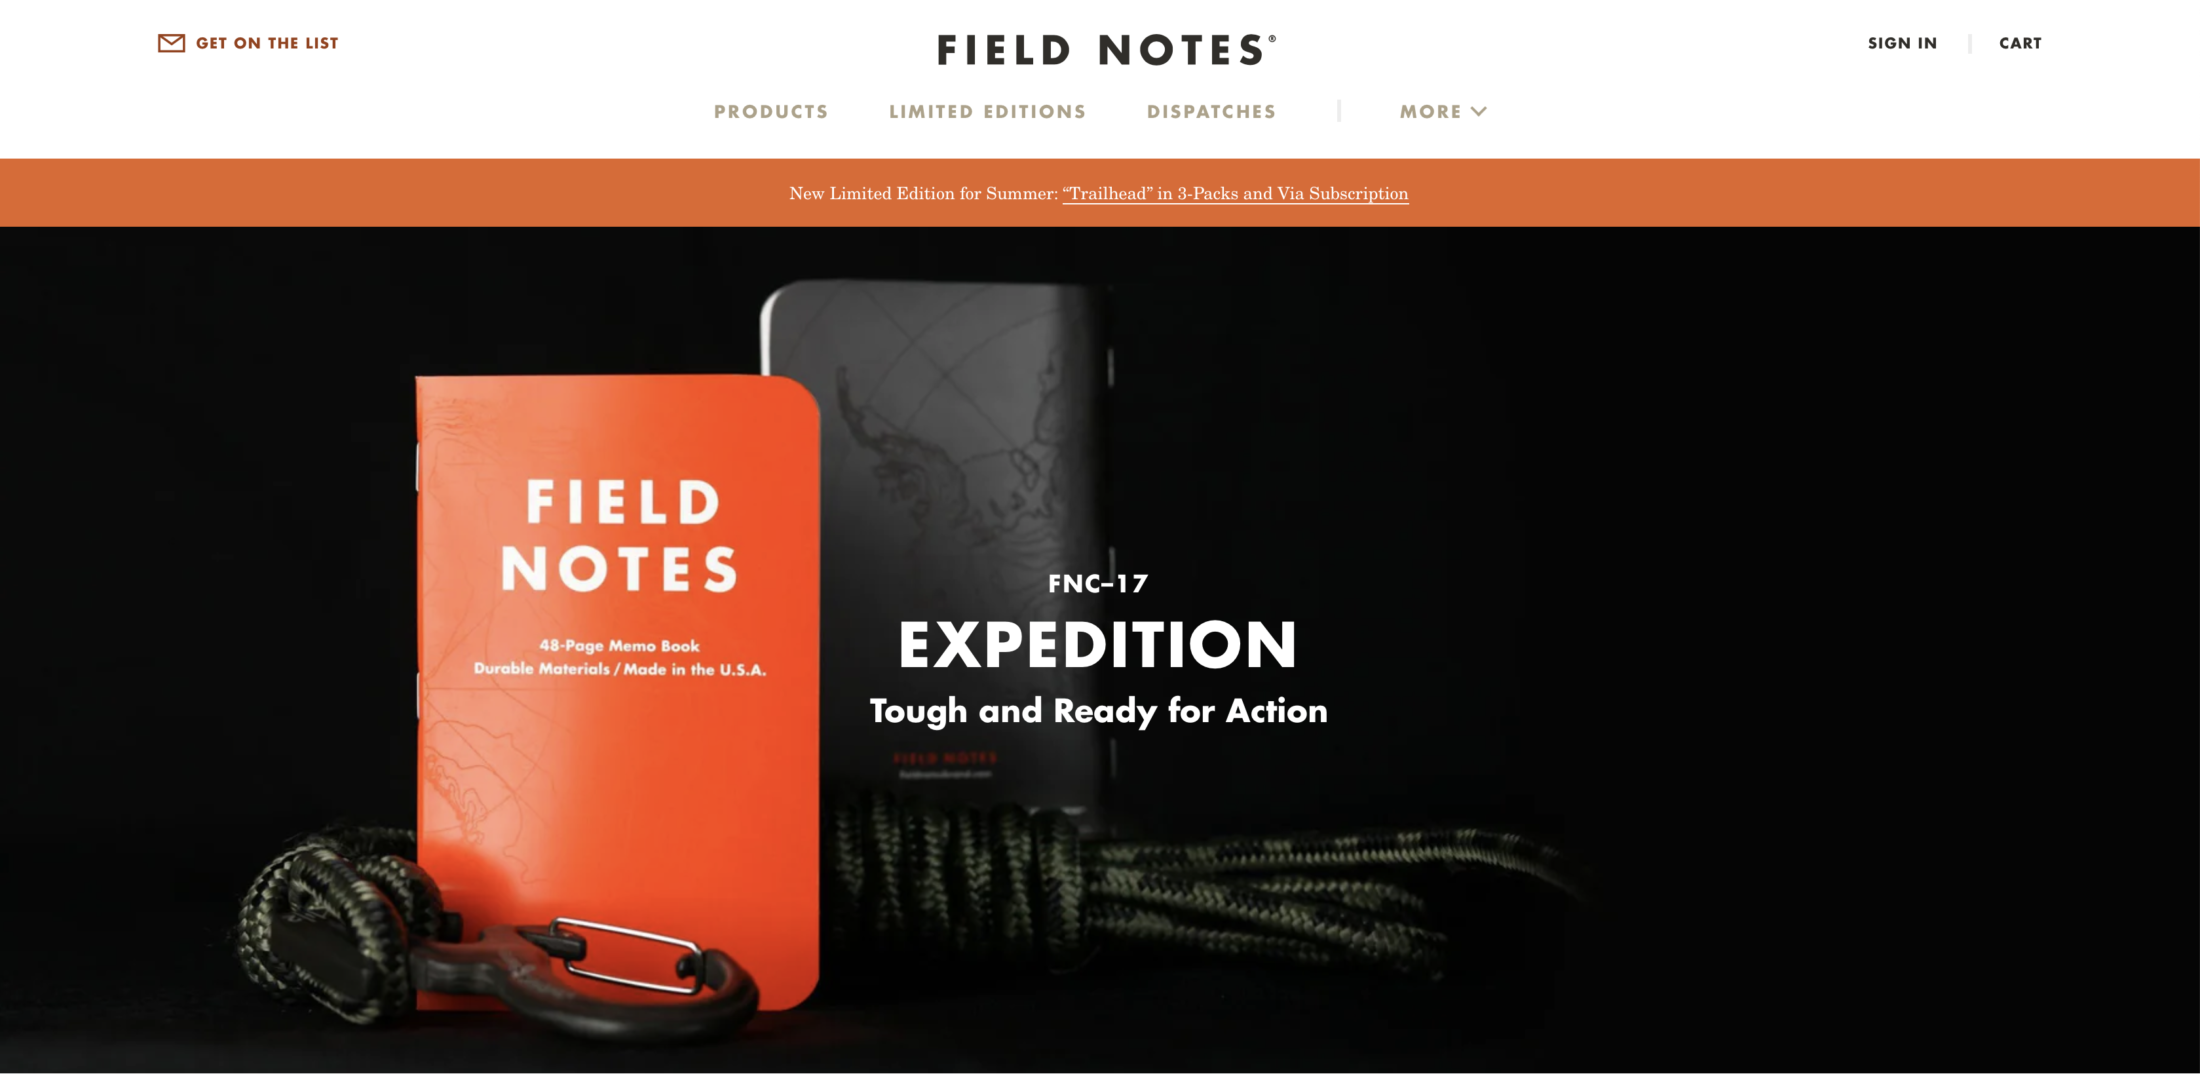 Field Notes — Expedition edition